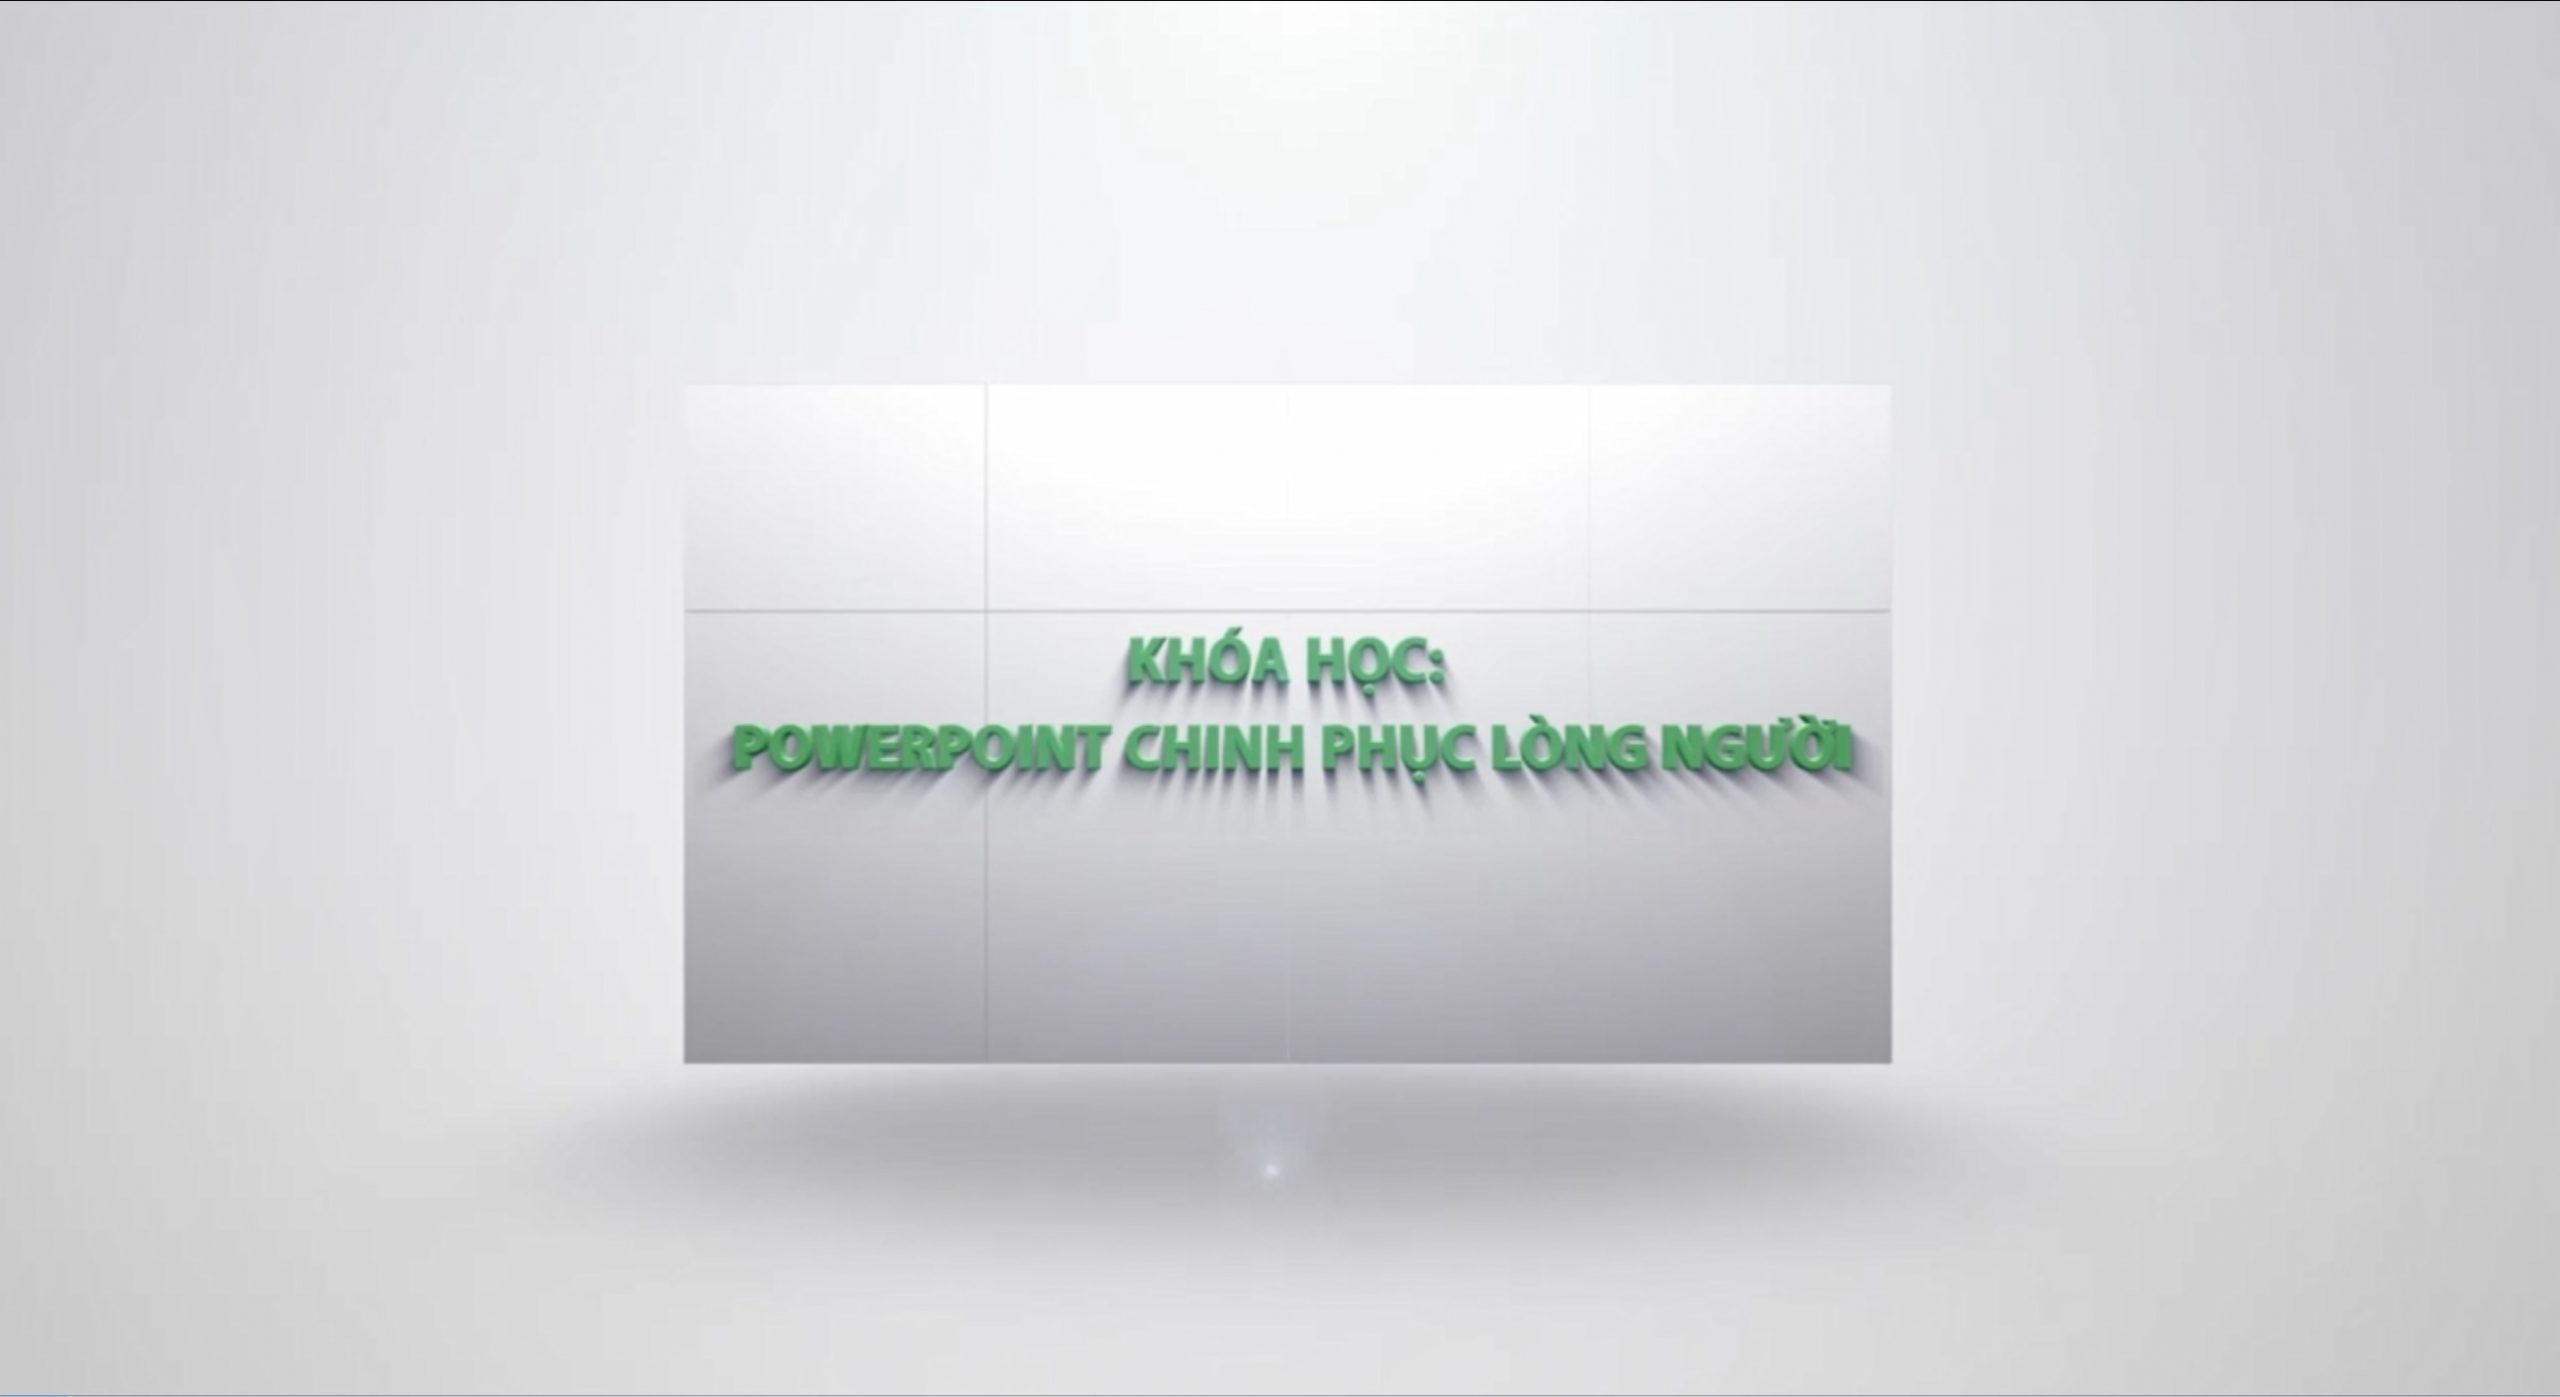 powerpoint-chinh-phuc-long-nguoi